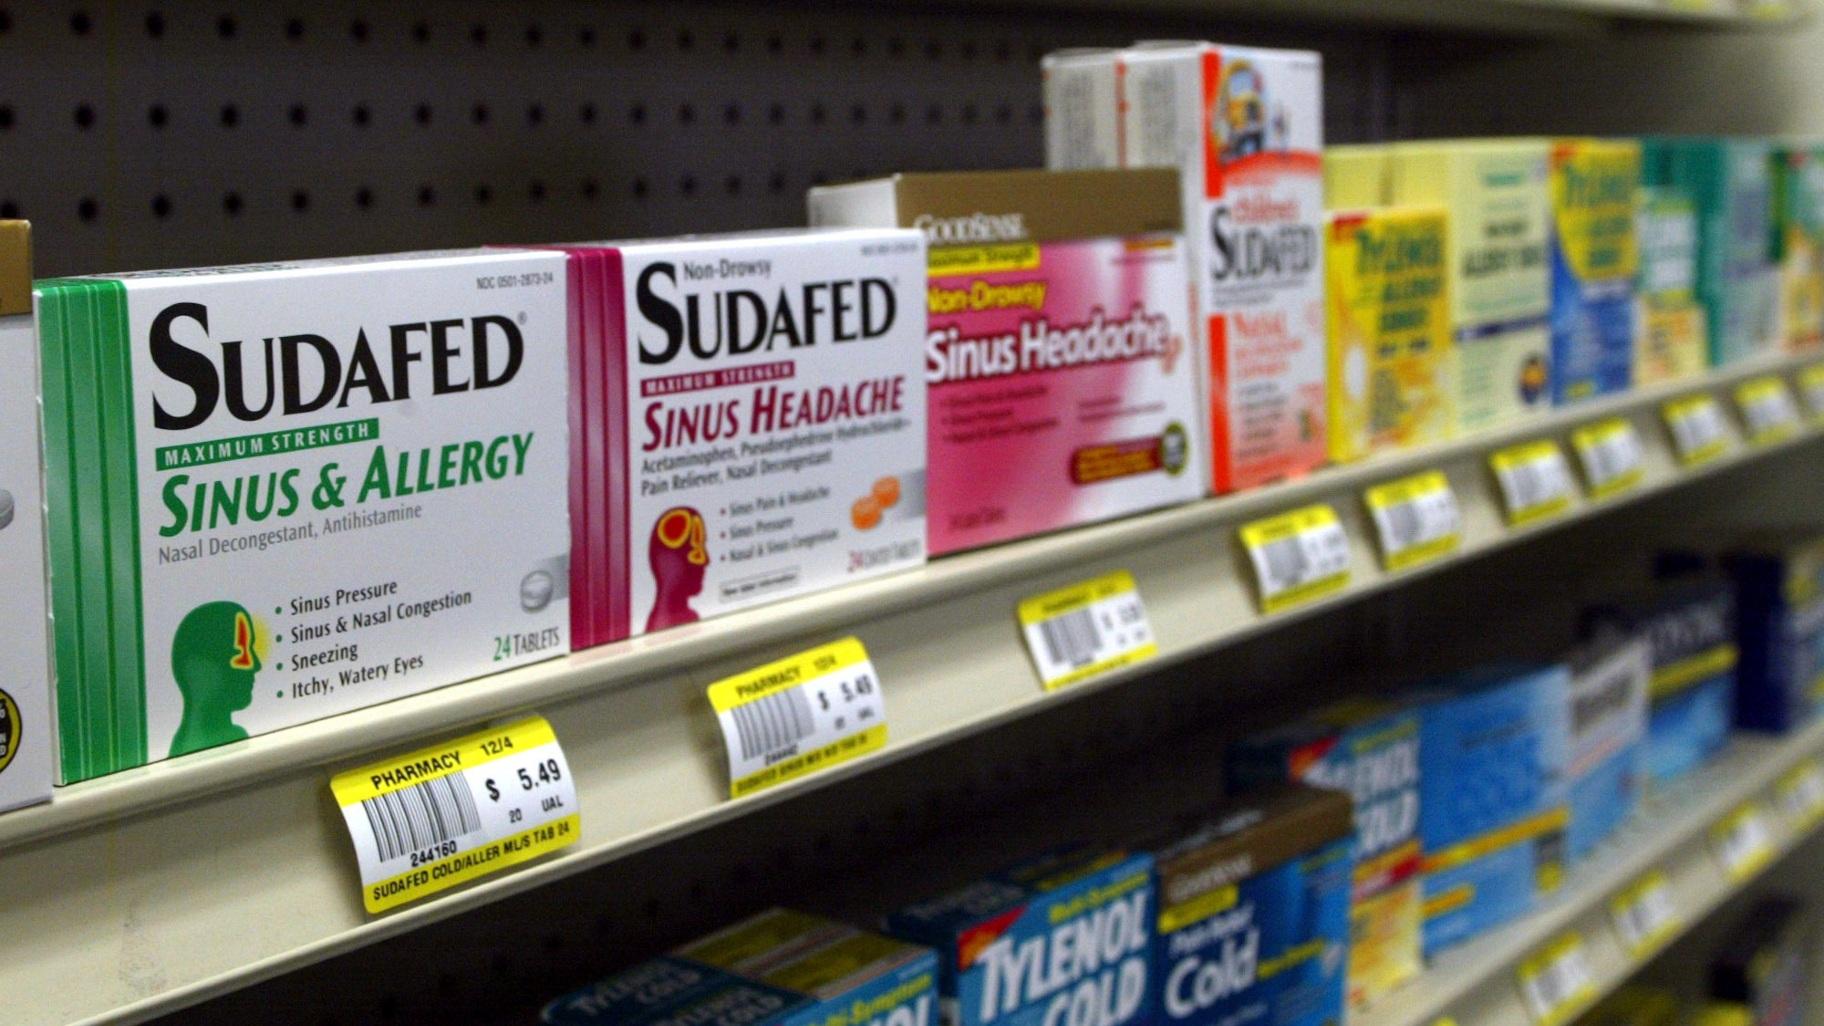 FILE - Sudafed and other common nasal decongestants containing pseudoephedrine are on display behind the counter at Hospital Discount Pharmacy in Edmond, Okla., Jan. 11, 2005. (AP Photo, File)